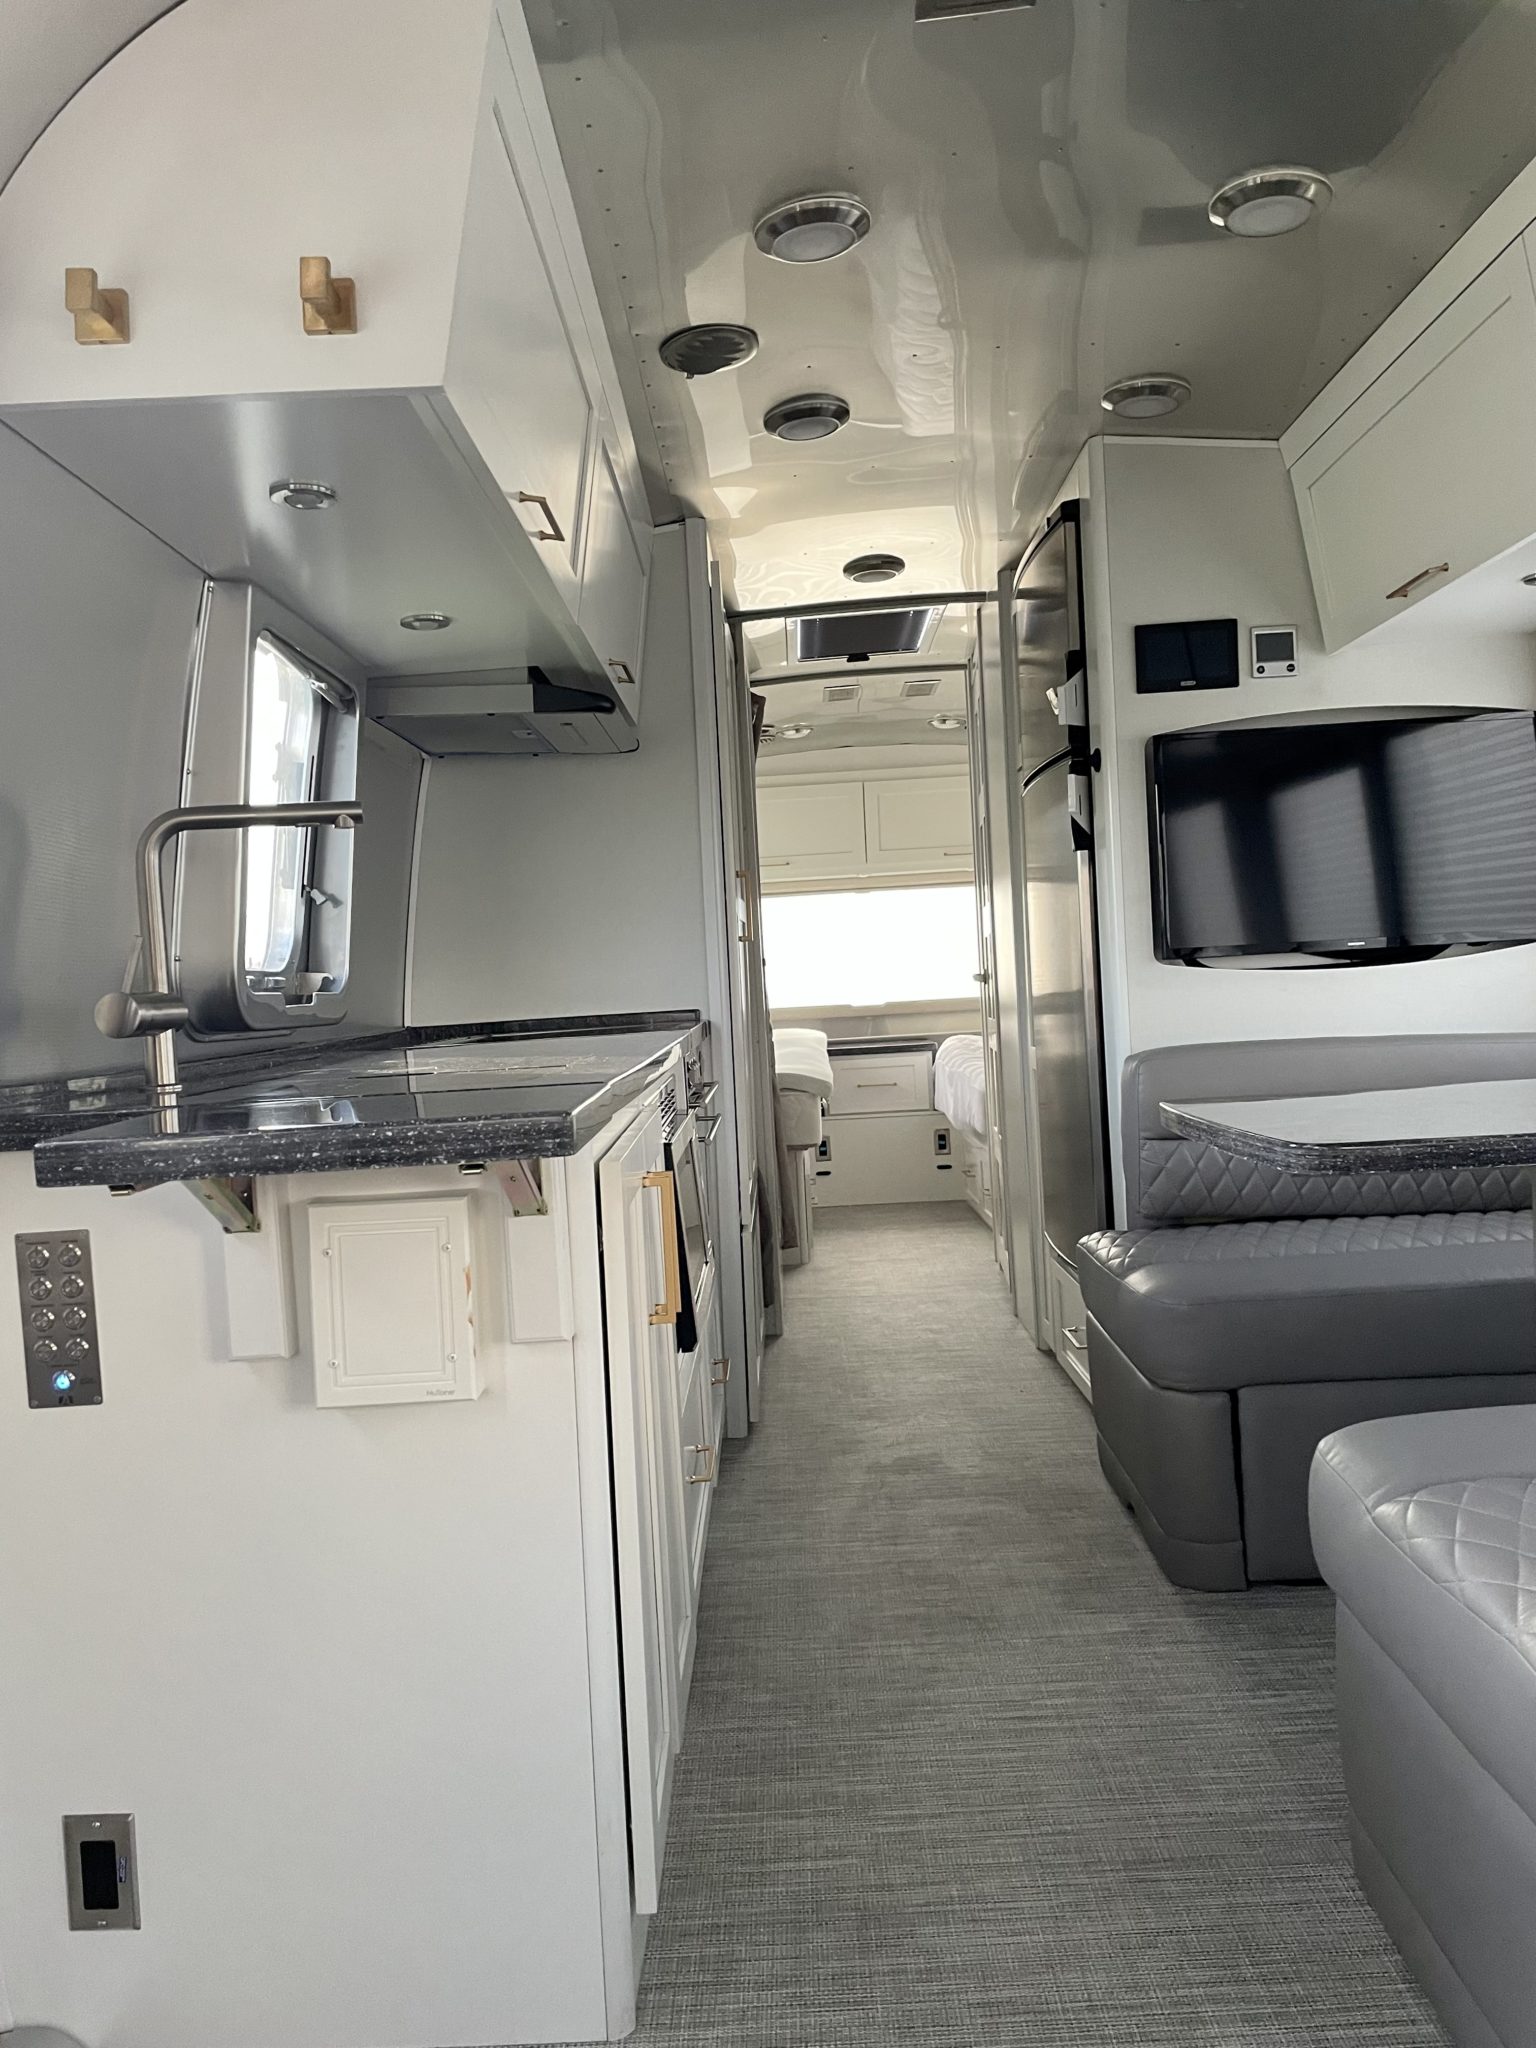 2021 Airstream 30ft Classic For Sale In Surprise Airstream Marketplace